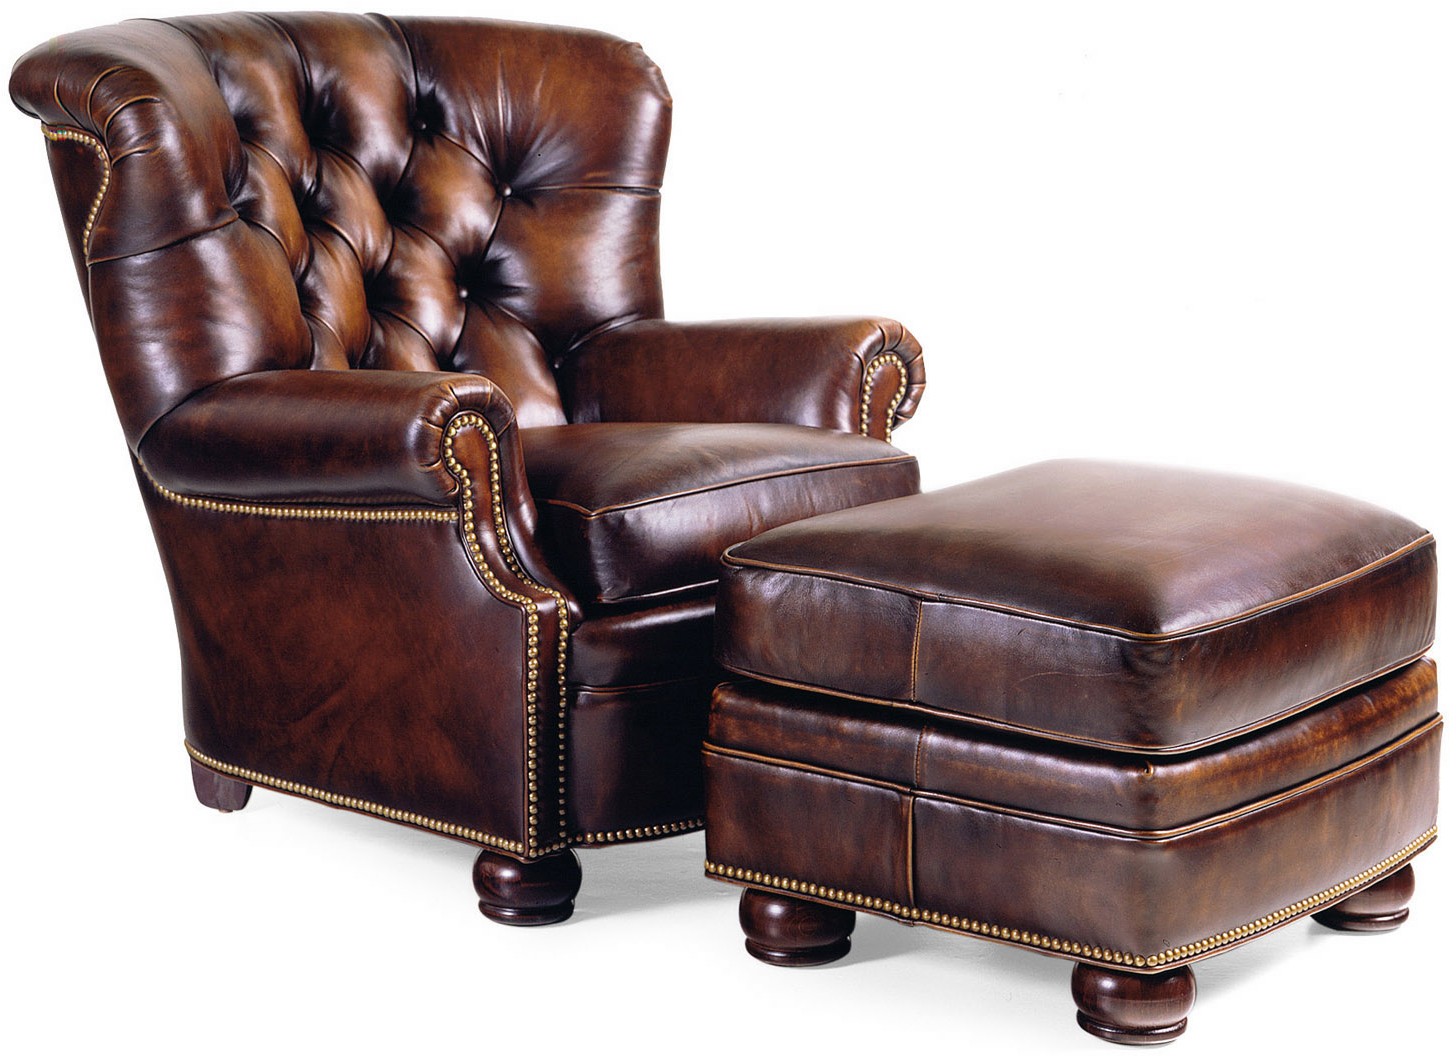 Classic Tufted Leather Armchair And Ottoman, Brown Leather Chair And Ottoman